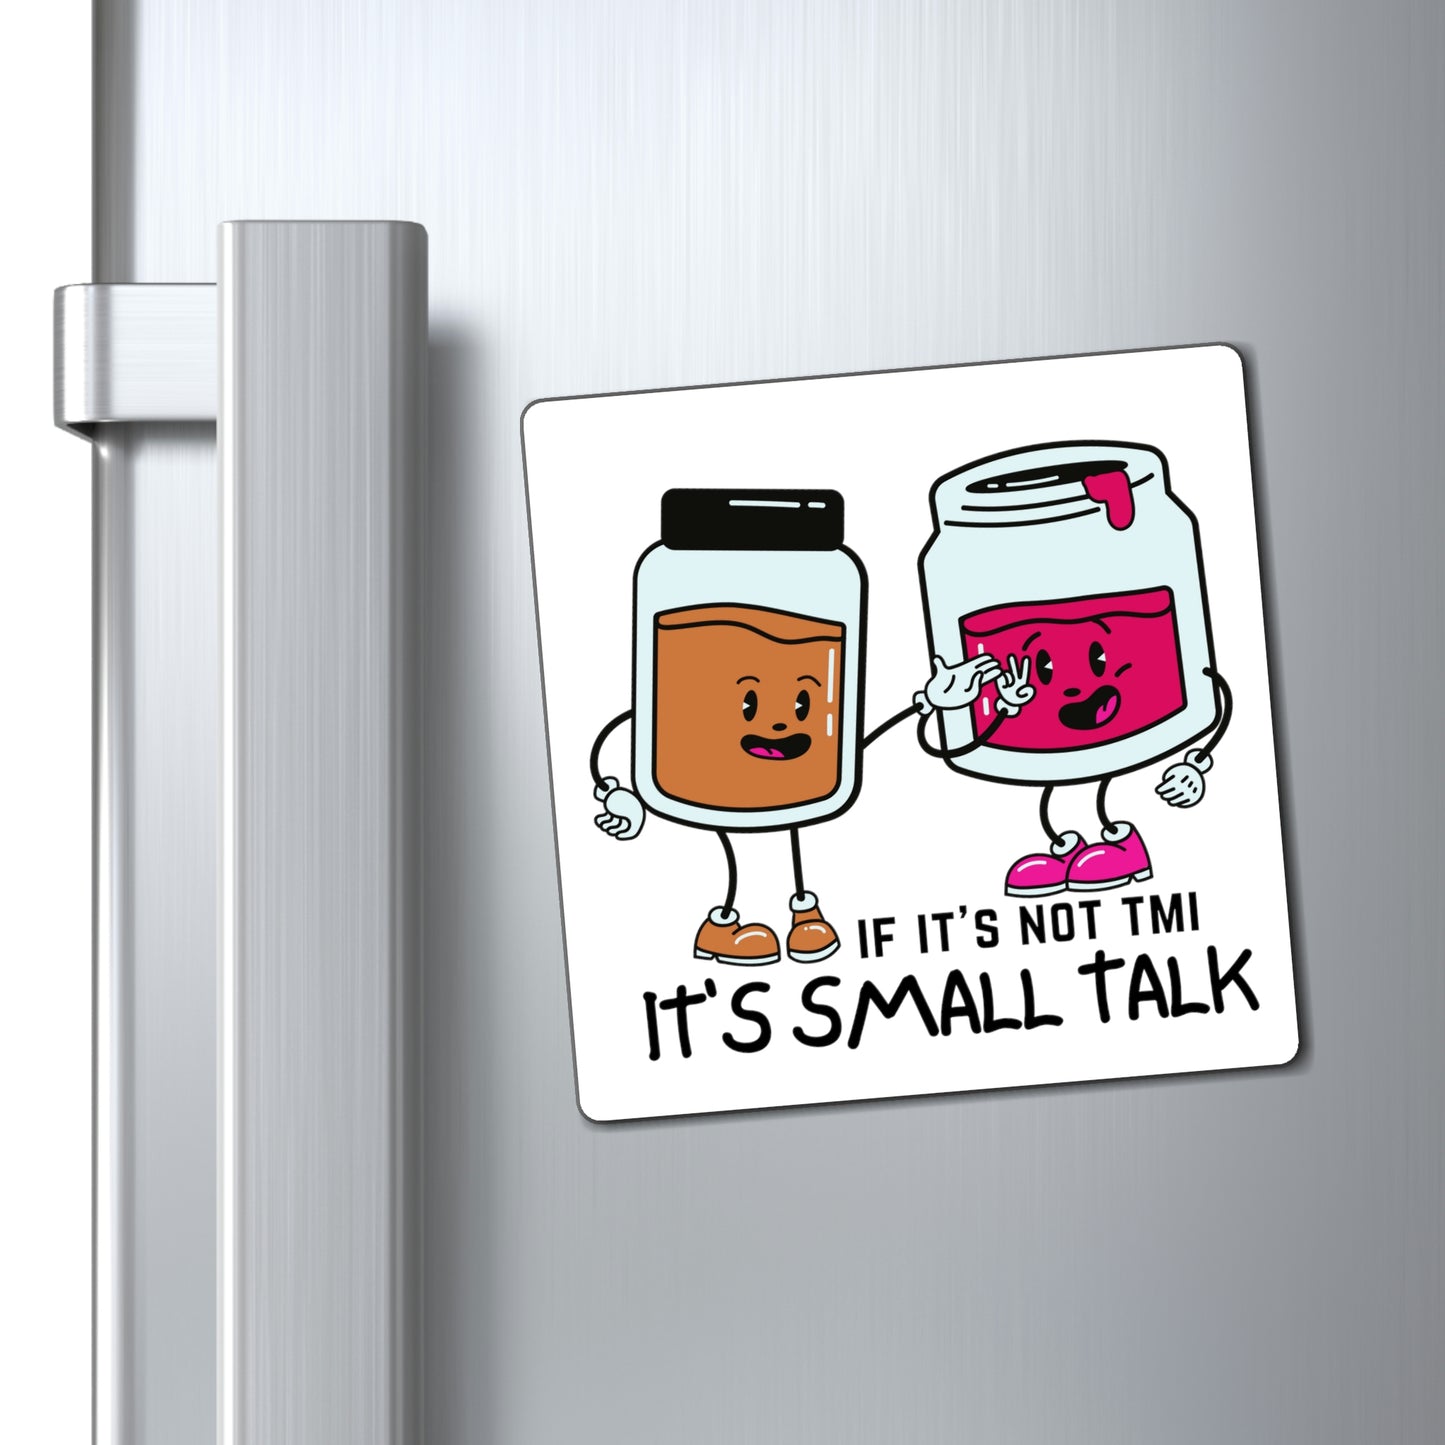 "If It's Not TMI, It's Small Talk" Square Magnets